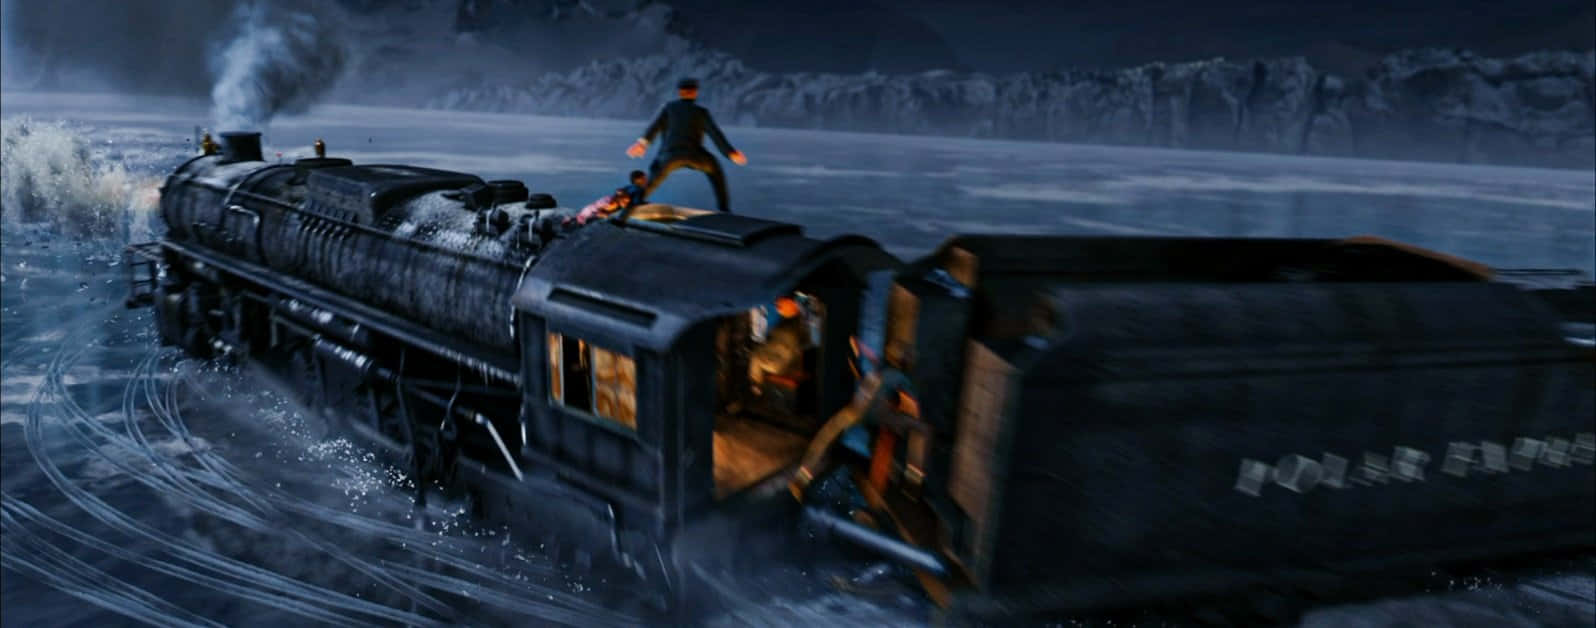 Experience the Magic of the Polar Express